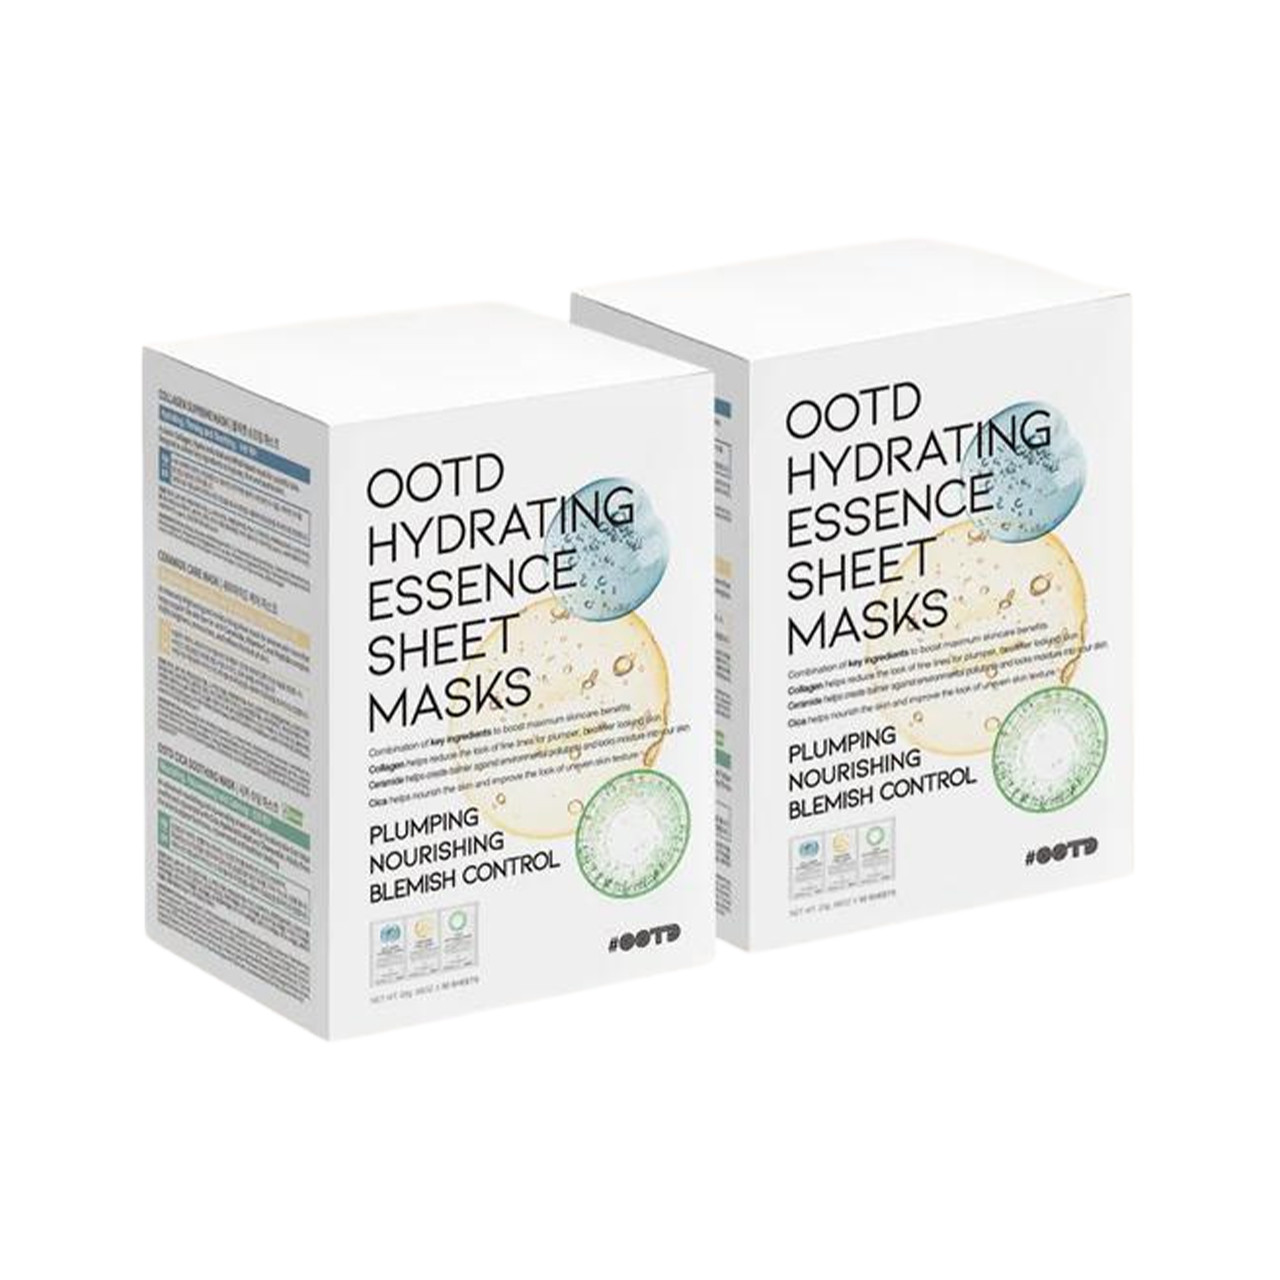 OOTD Hydrating Essence Sheet Mask 30 Sheets — 2x30 Sheets